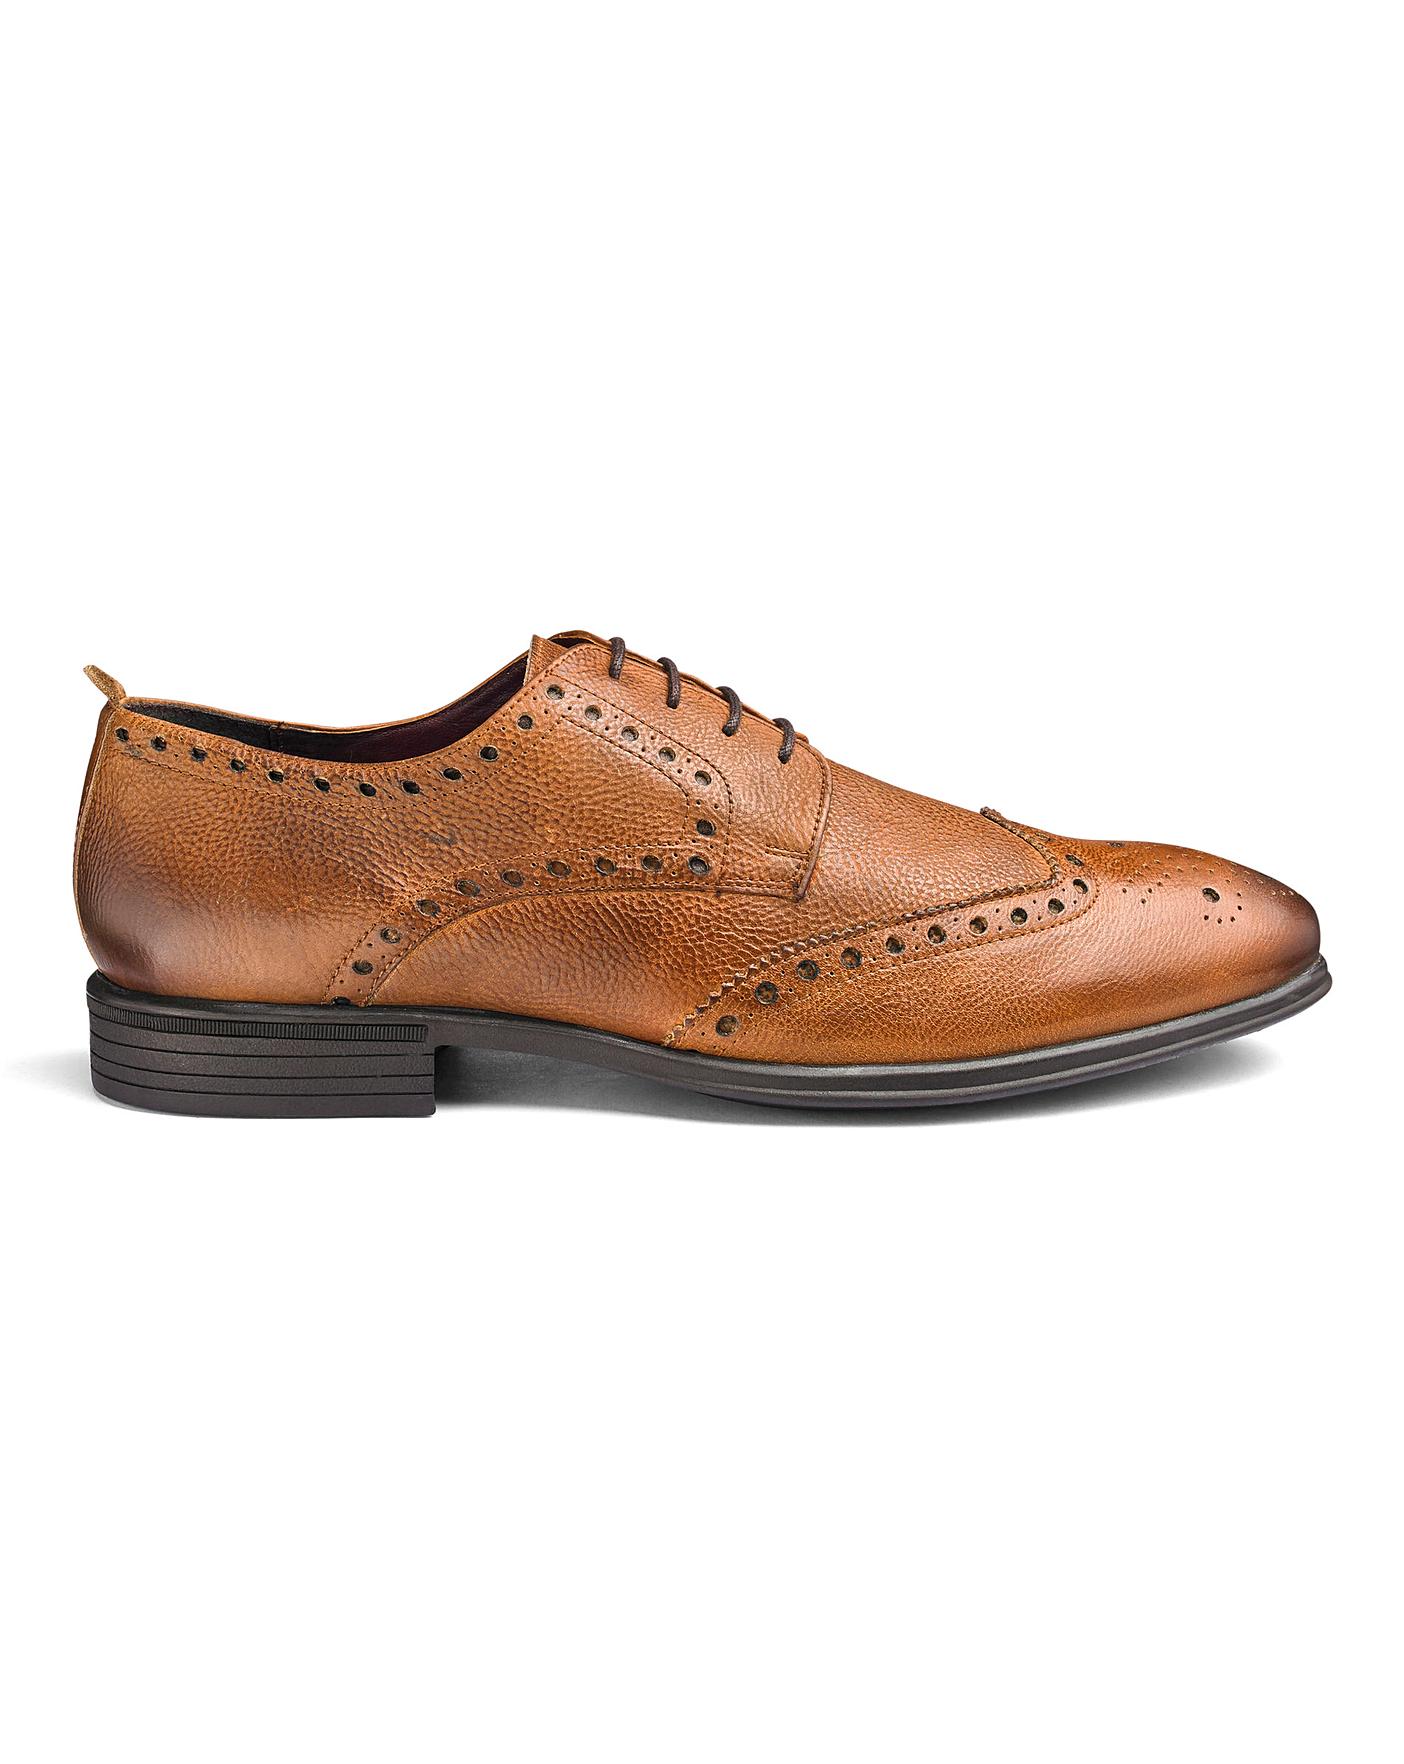 Leather Brogues Standard Fit.